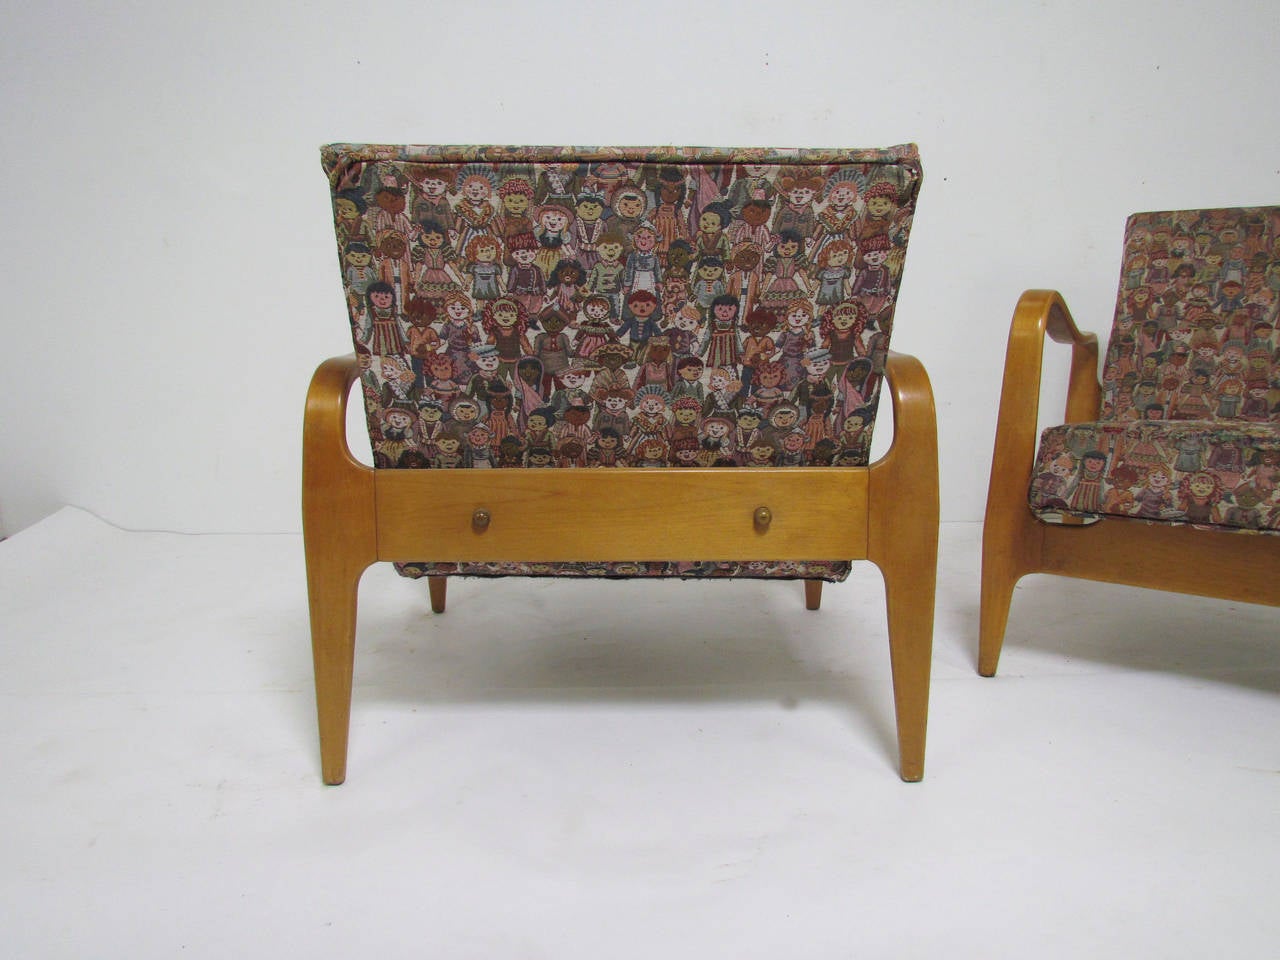 Upholstery Pair of Sculptural Bent Ply Lounge Chairs by Thonet, circa 1950s